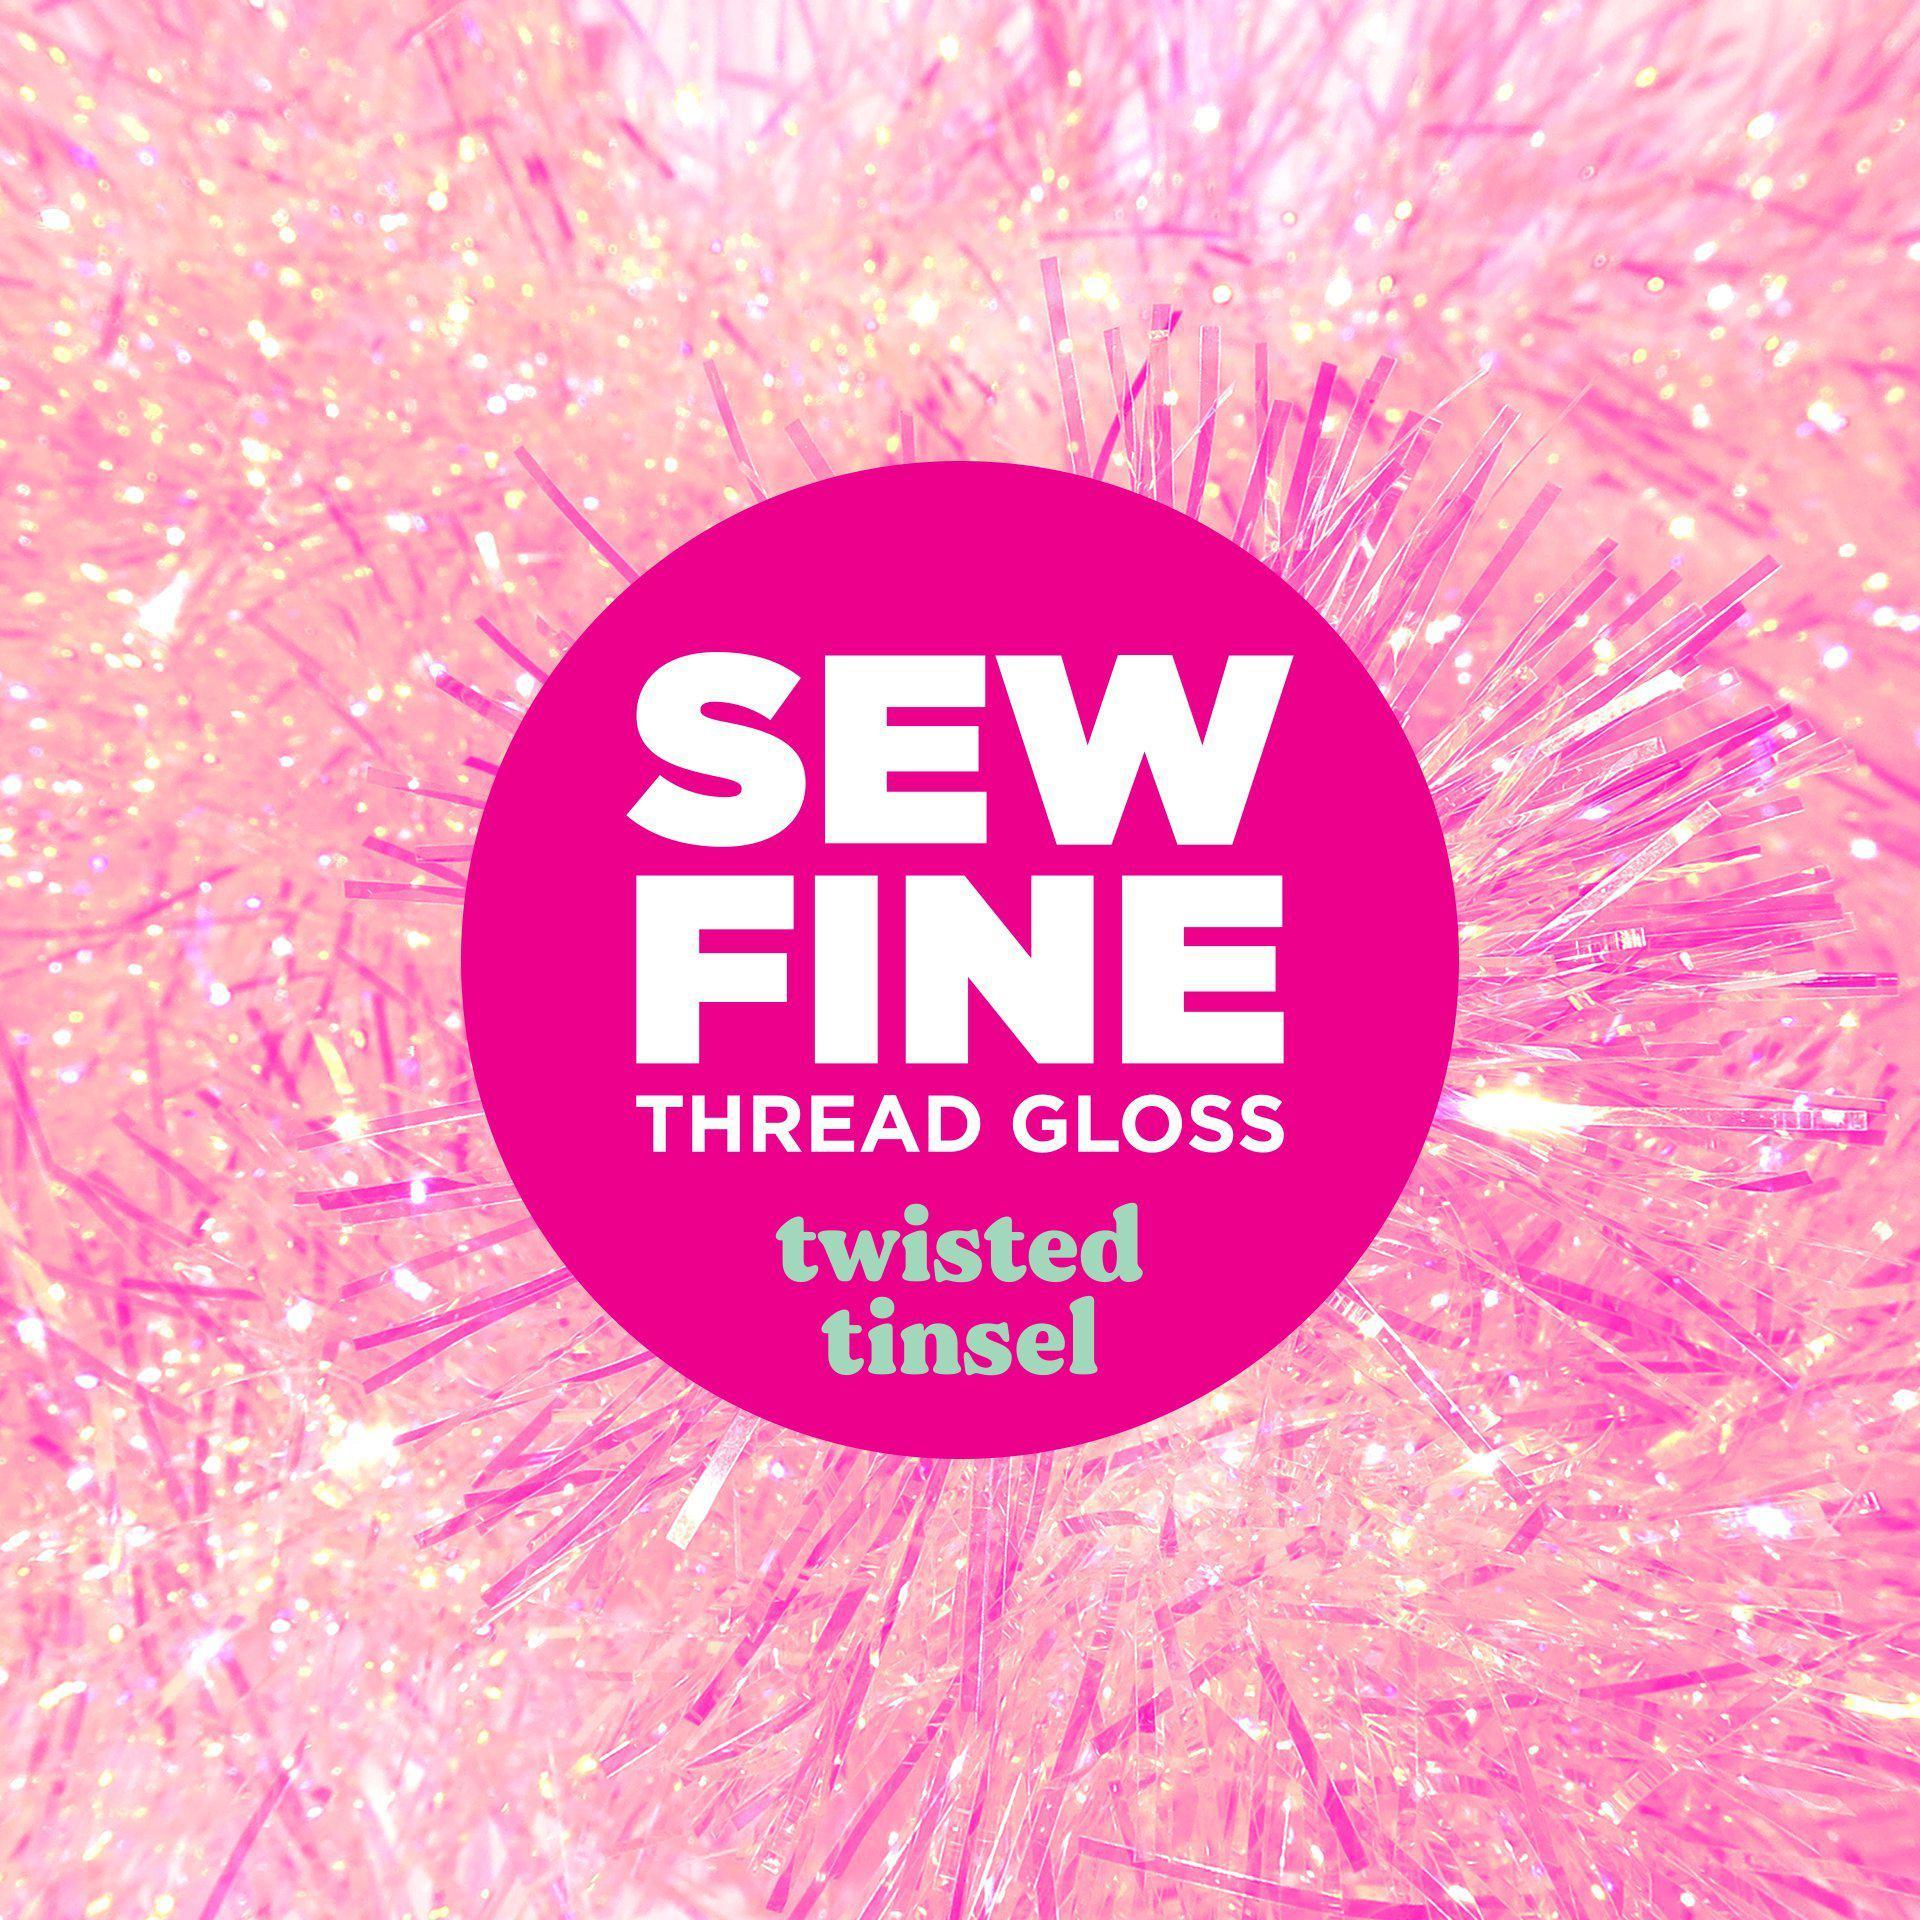 Sew Fine-Sew Fine Thread Gloss: Twisted Tinsel-sewing notion-gather here online